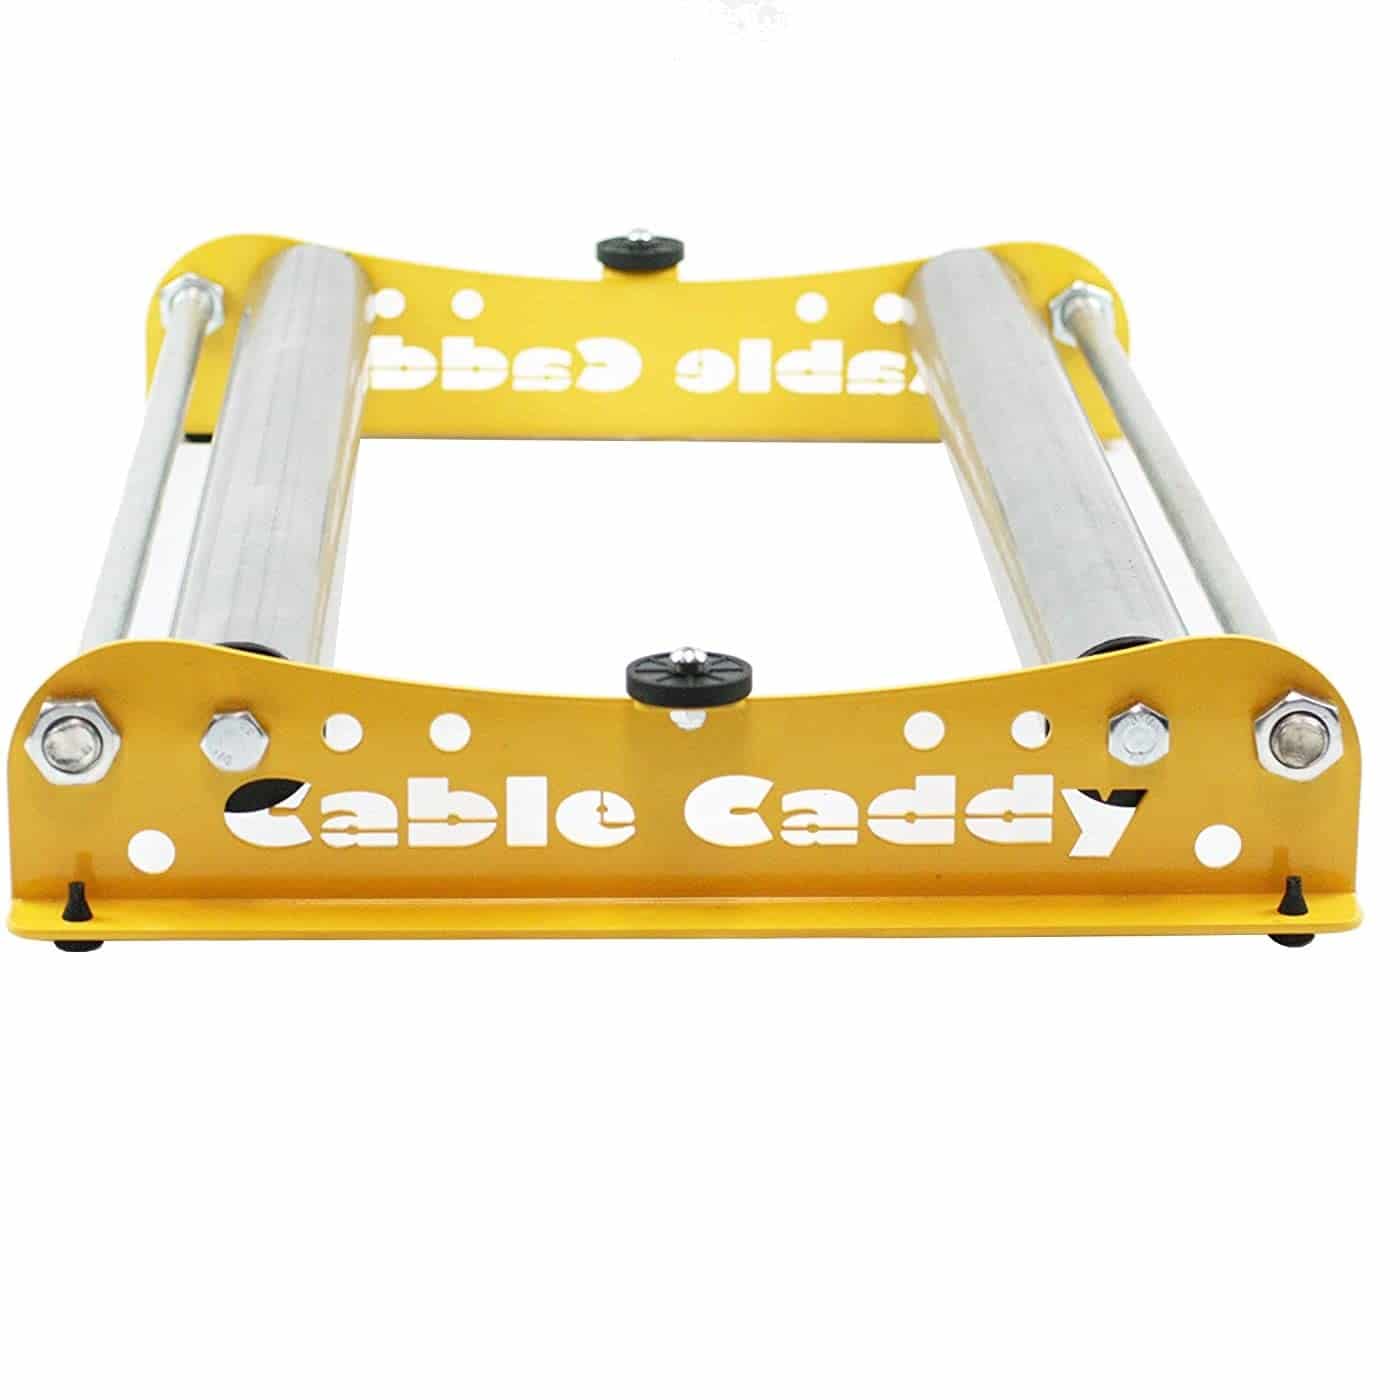 cable-caddy-gelb